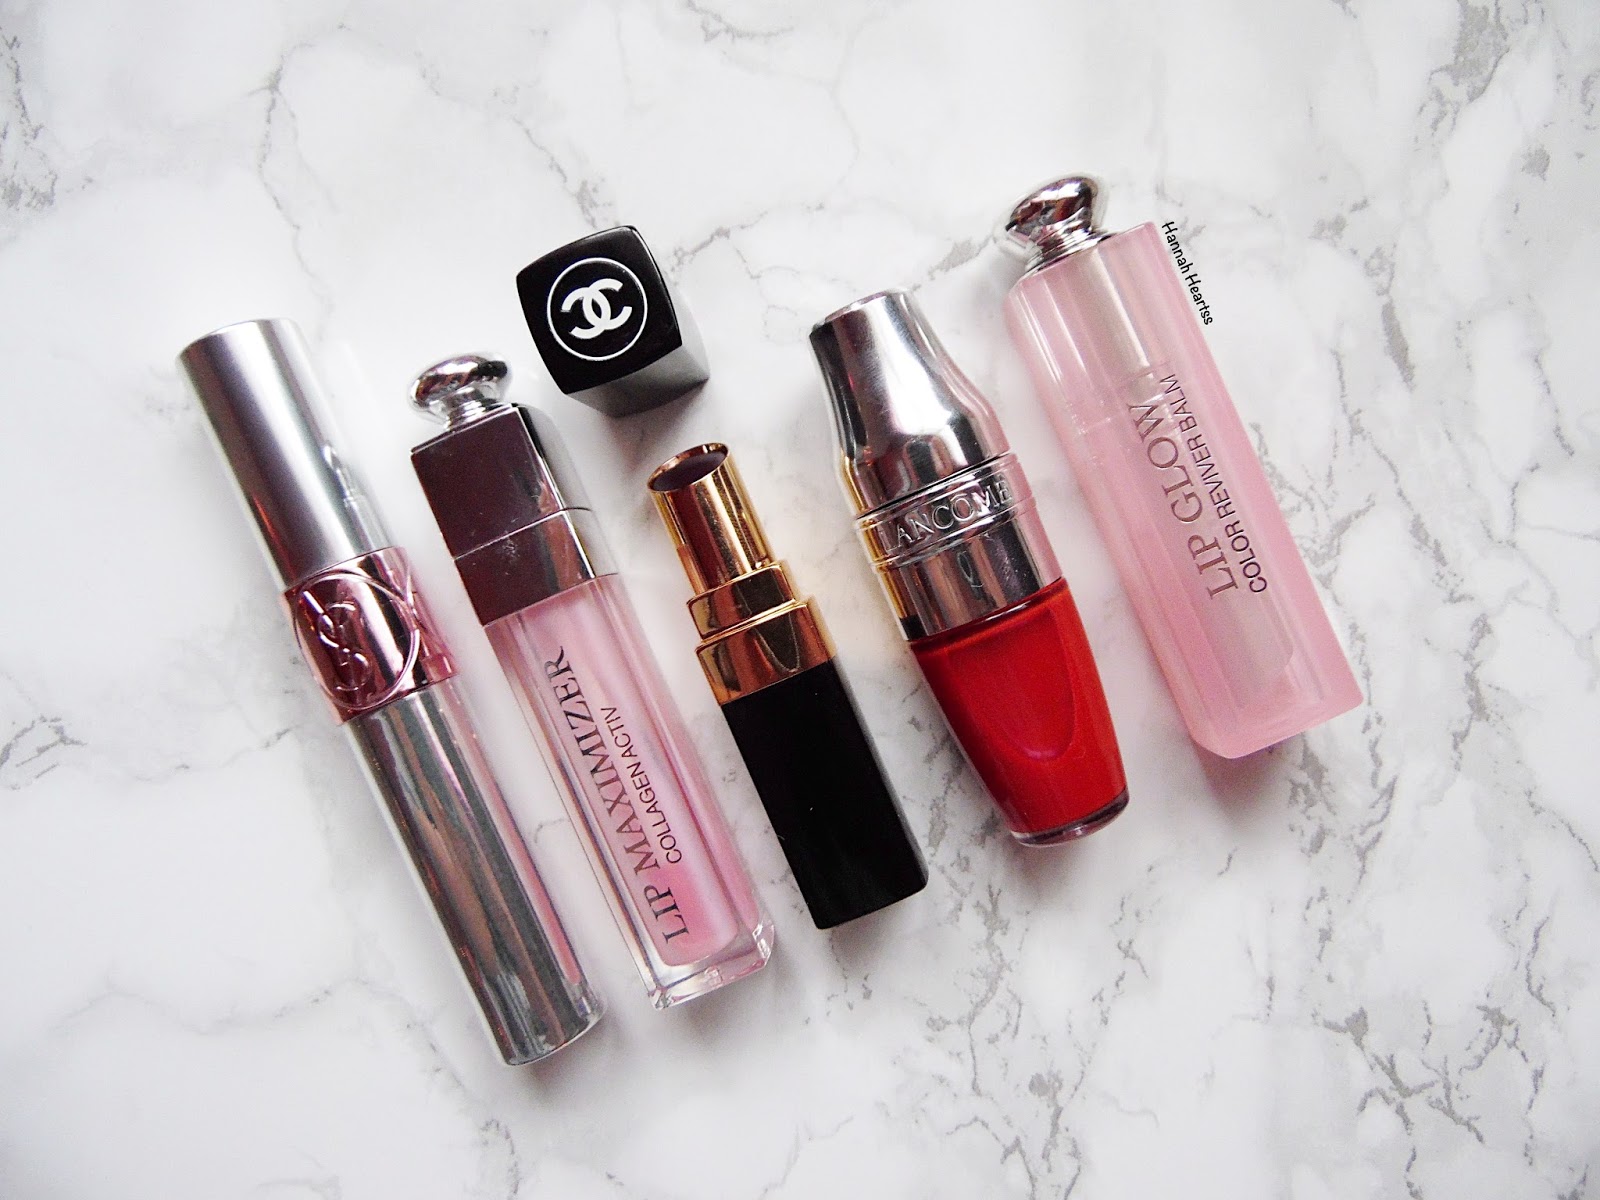 Top 5 High End Lip Products